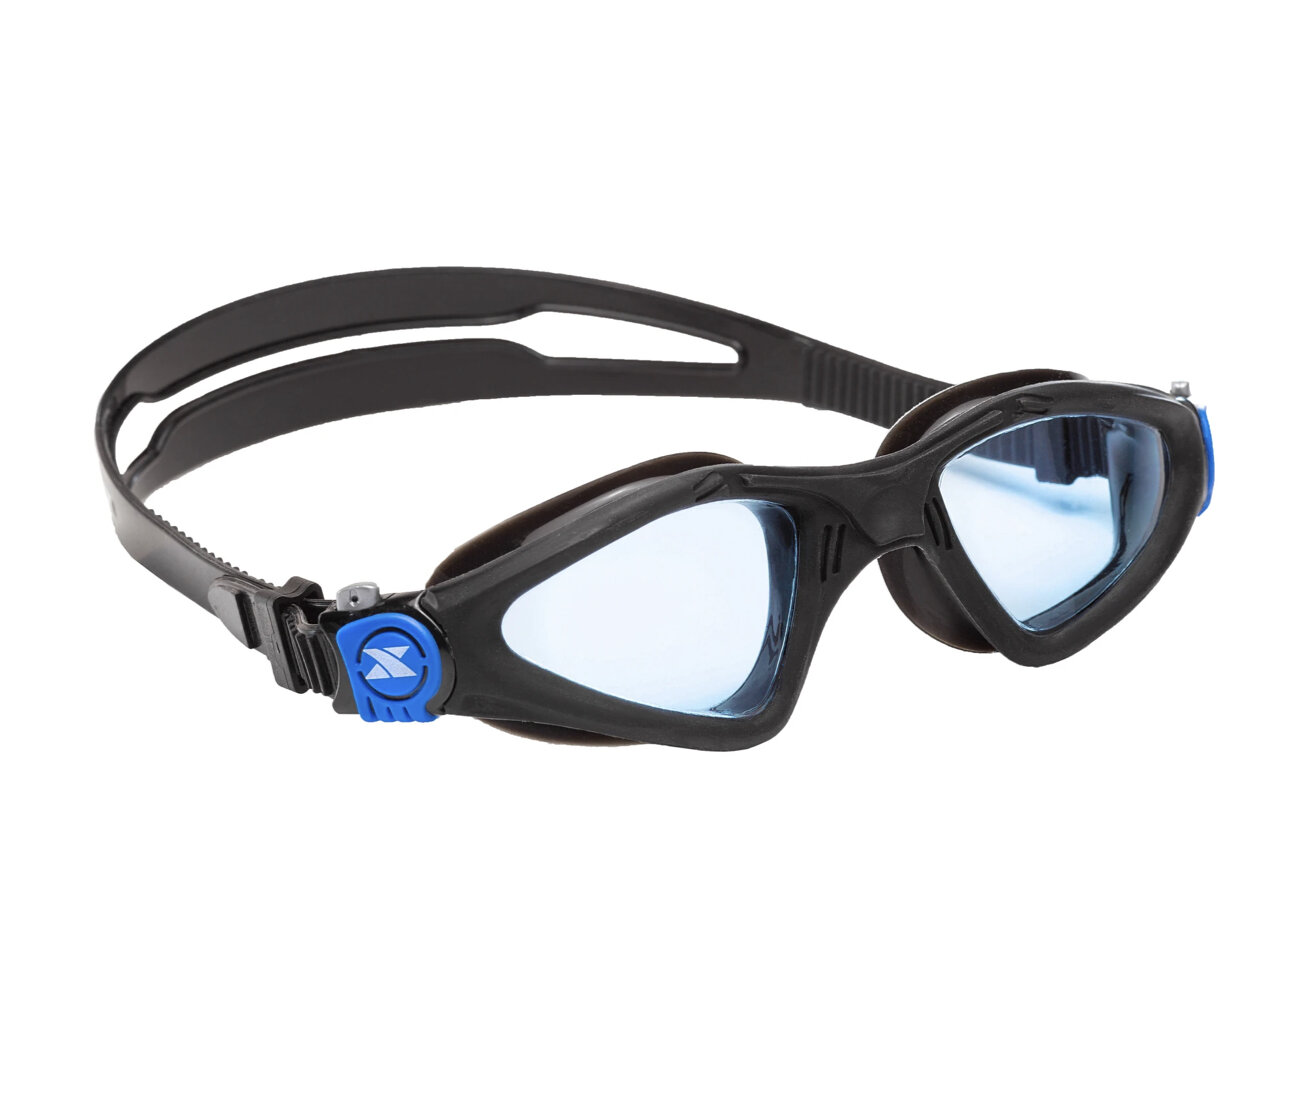 VELOCITY BLUE GOGGLES SPECIAL